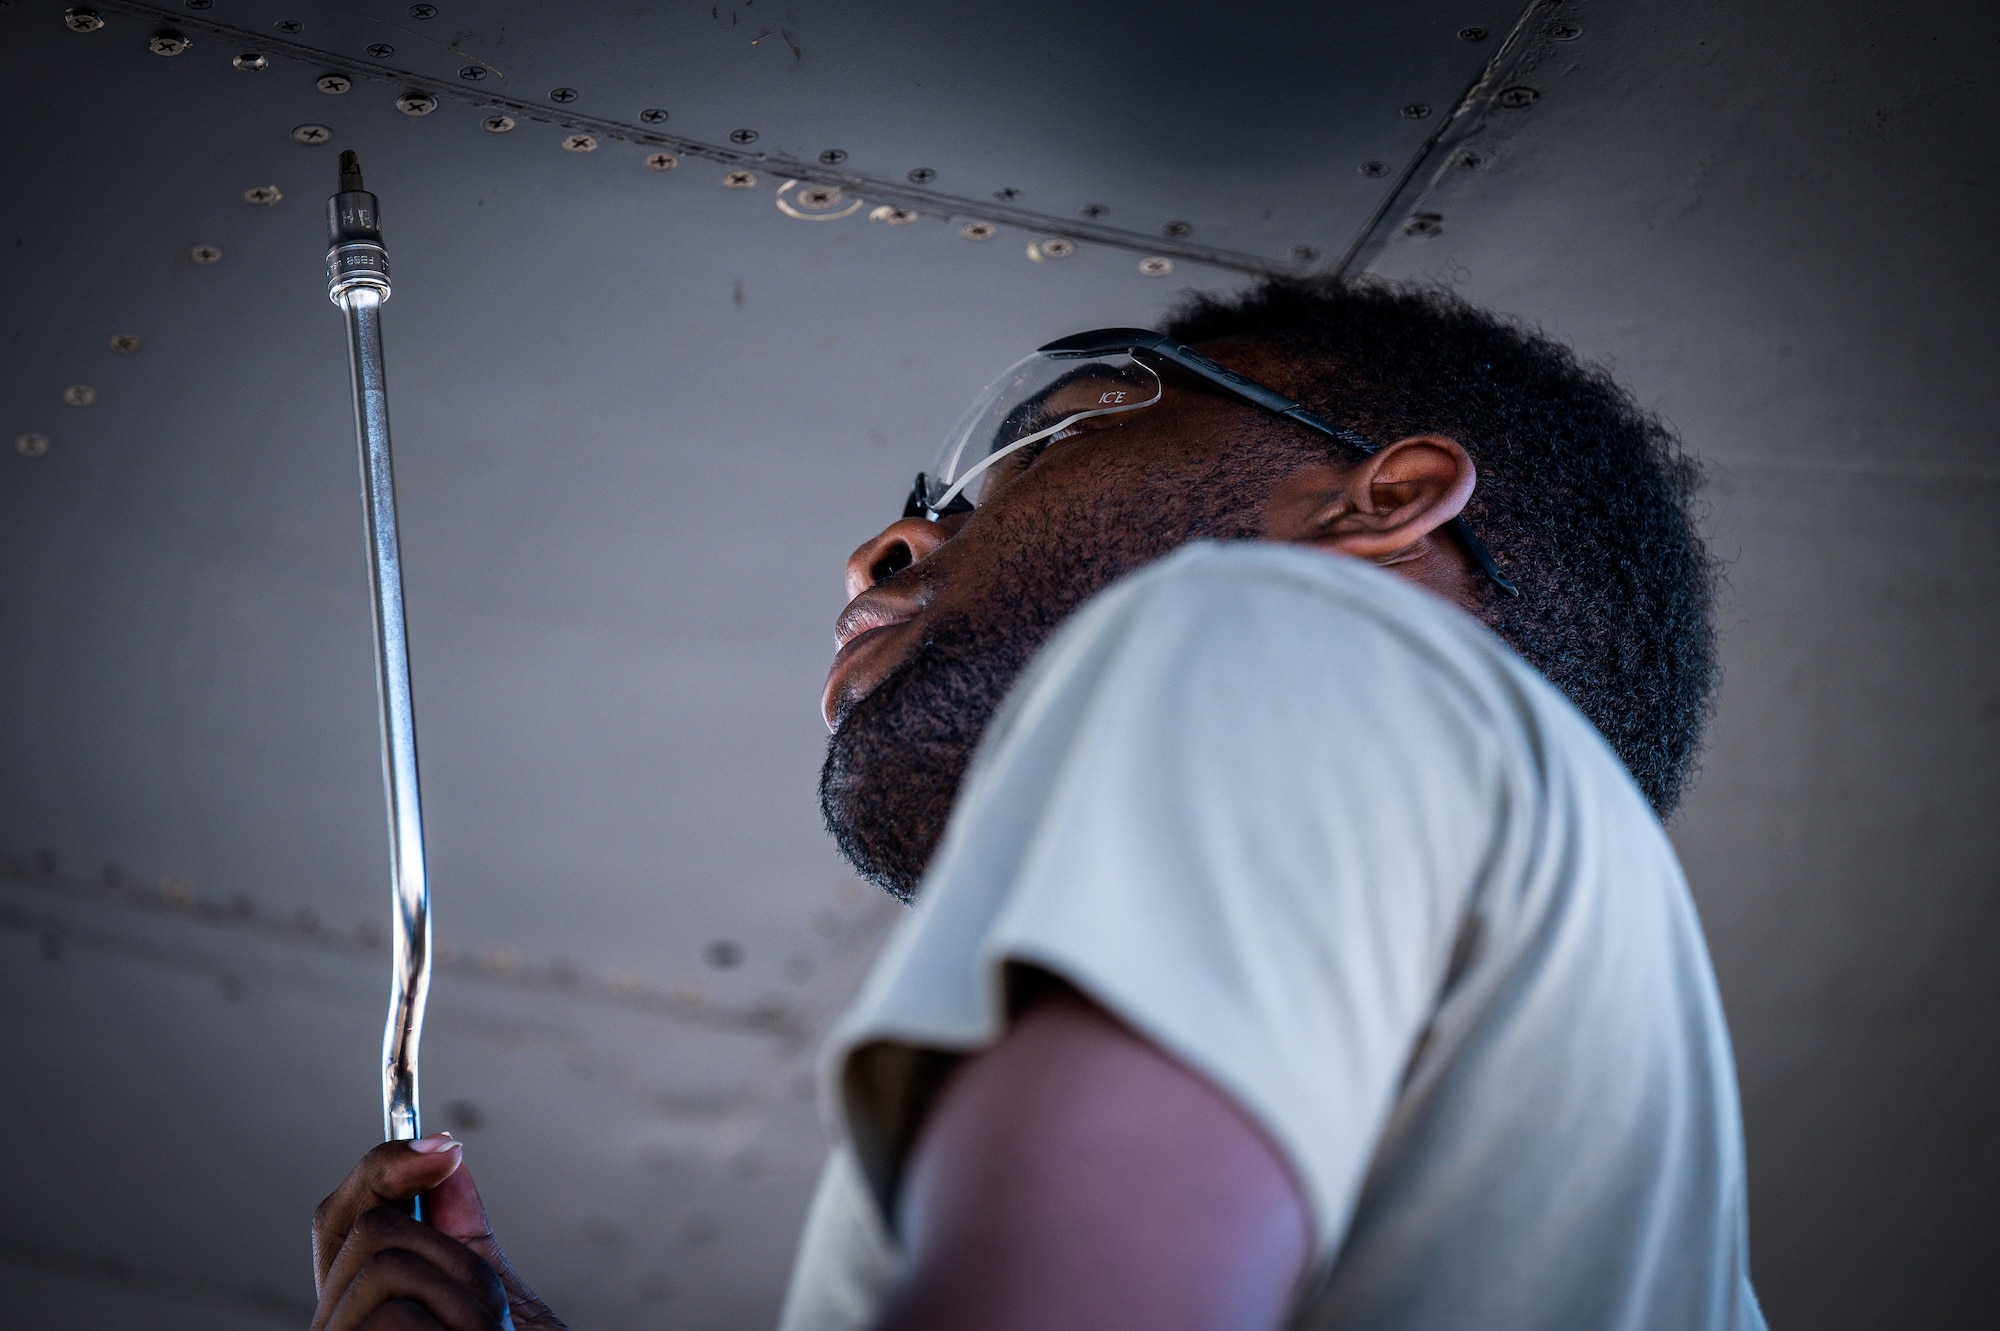 An Airman from Dyess Air Force Base, Texas, removes a panel from a B-1B Lancer’s wing at Barksdale Air Force Base, Louisiana, July 7, 2021.